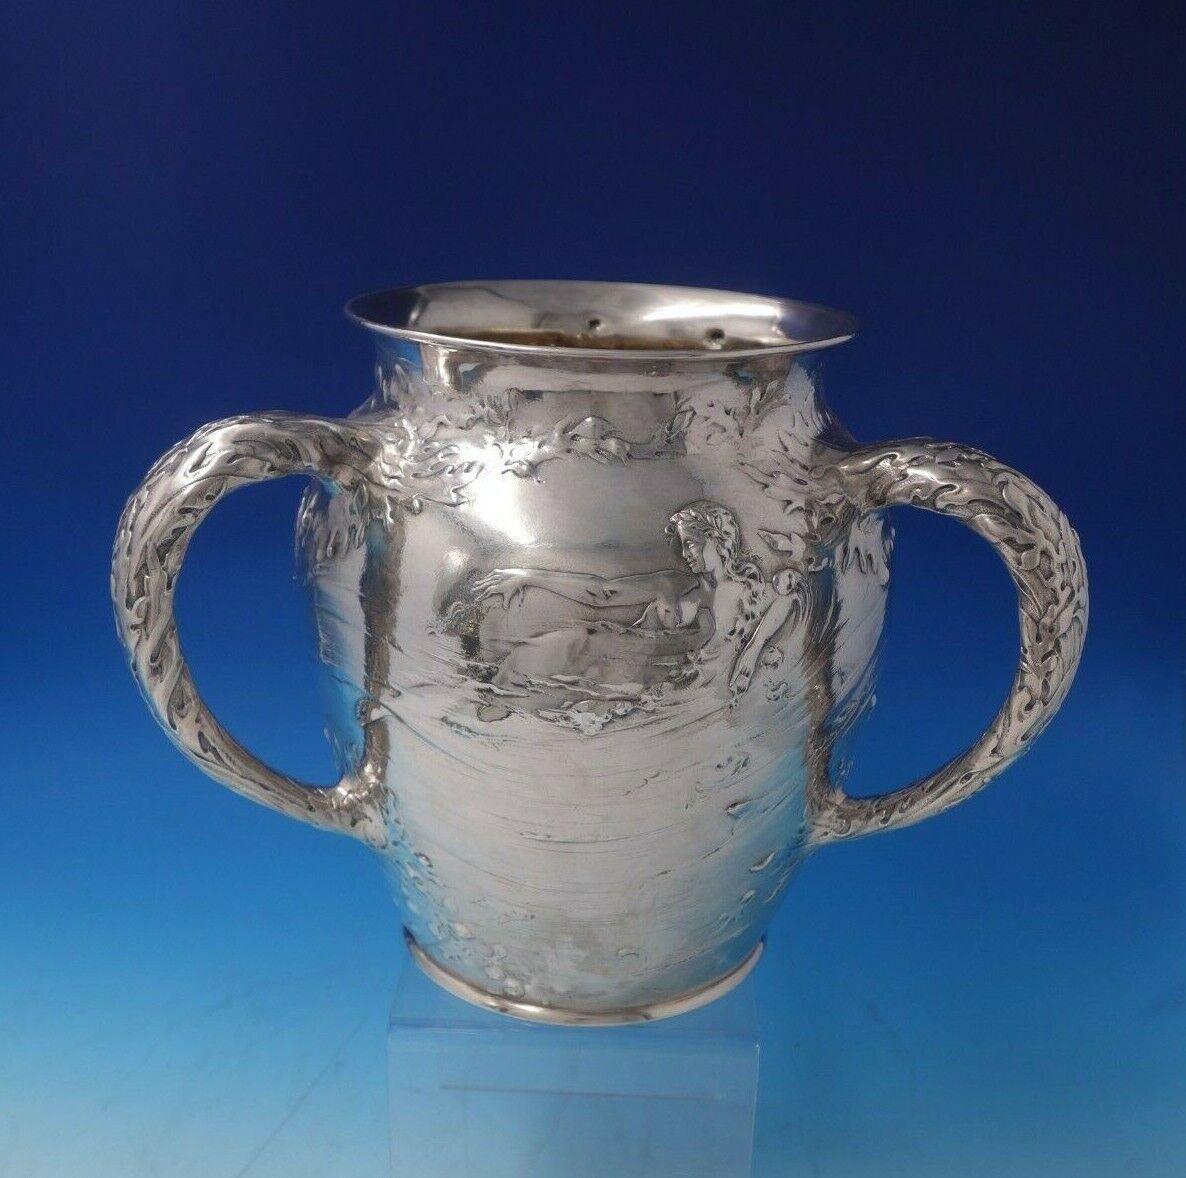 Gorham

Beautiful Gorham sterling silver champagne cooler marked #7773 with gold washed interior. This piece features three handles and seaweed, fish, waves, and nude swimming goddess motif (two scenes). It holds 9 pints, measures 9